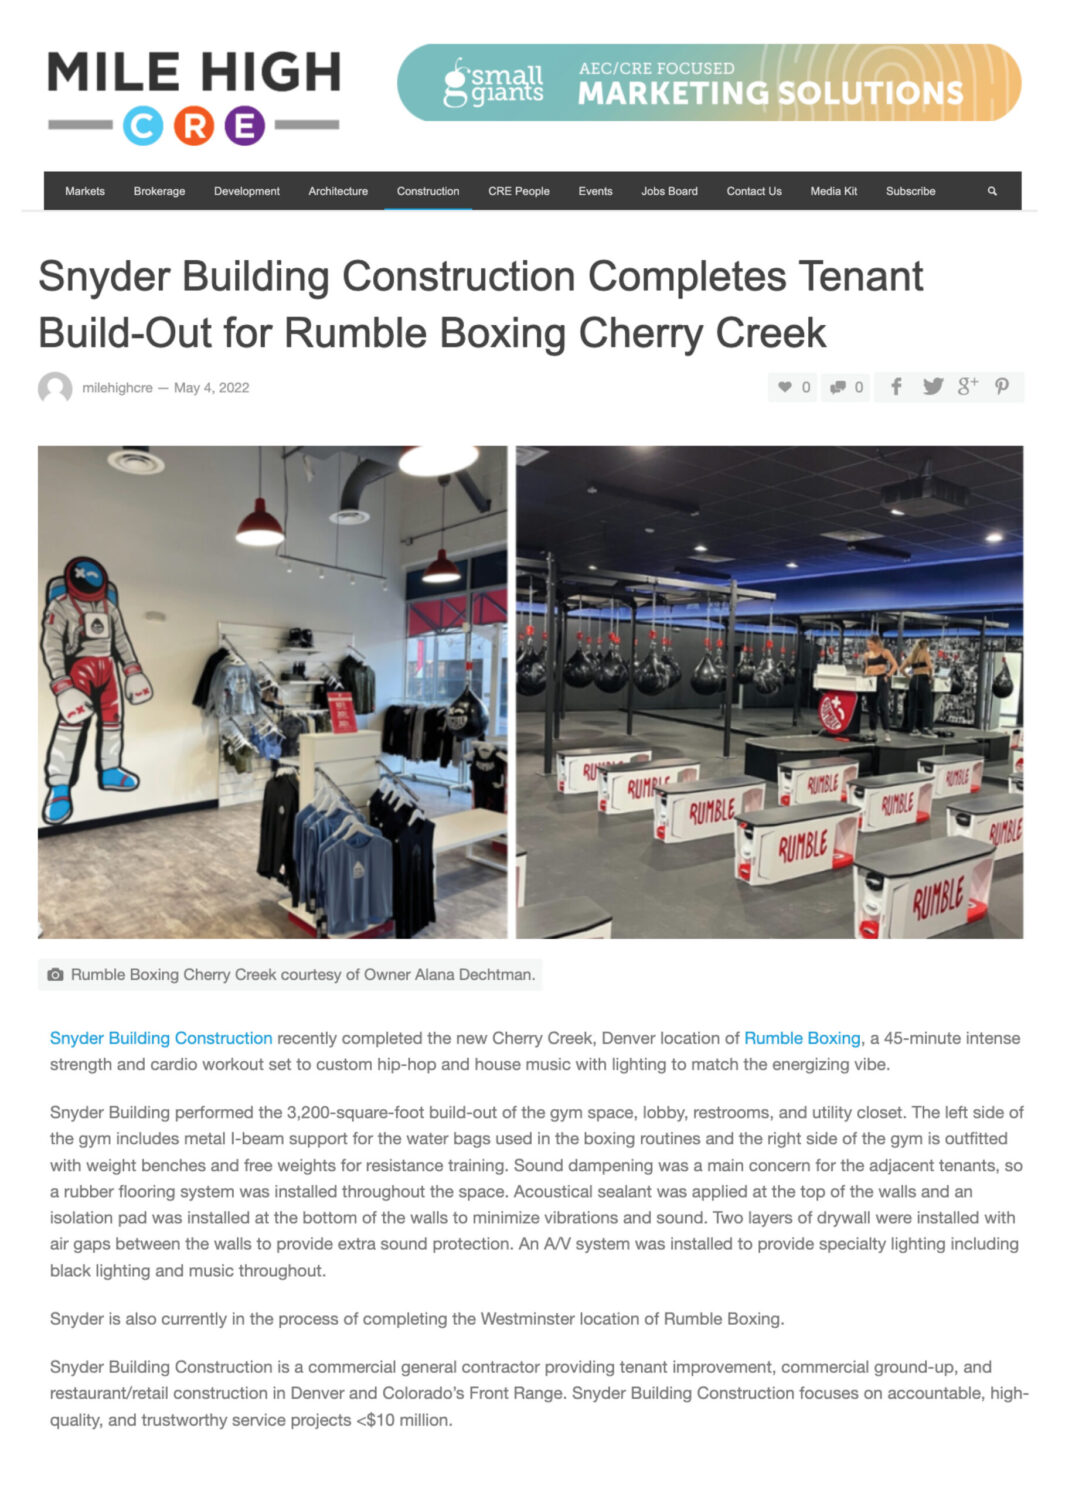 Snyder-Building-Construction-Completes-Build-Out-For-Rumble-Boxing